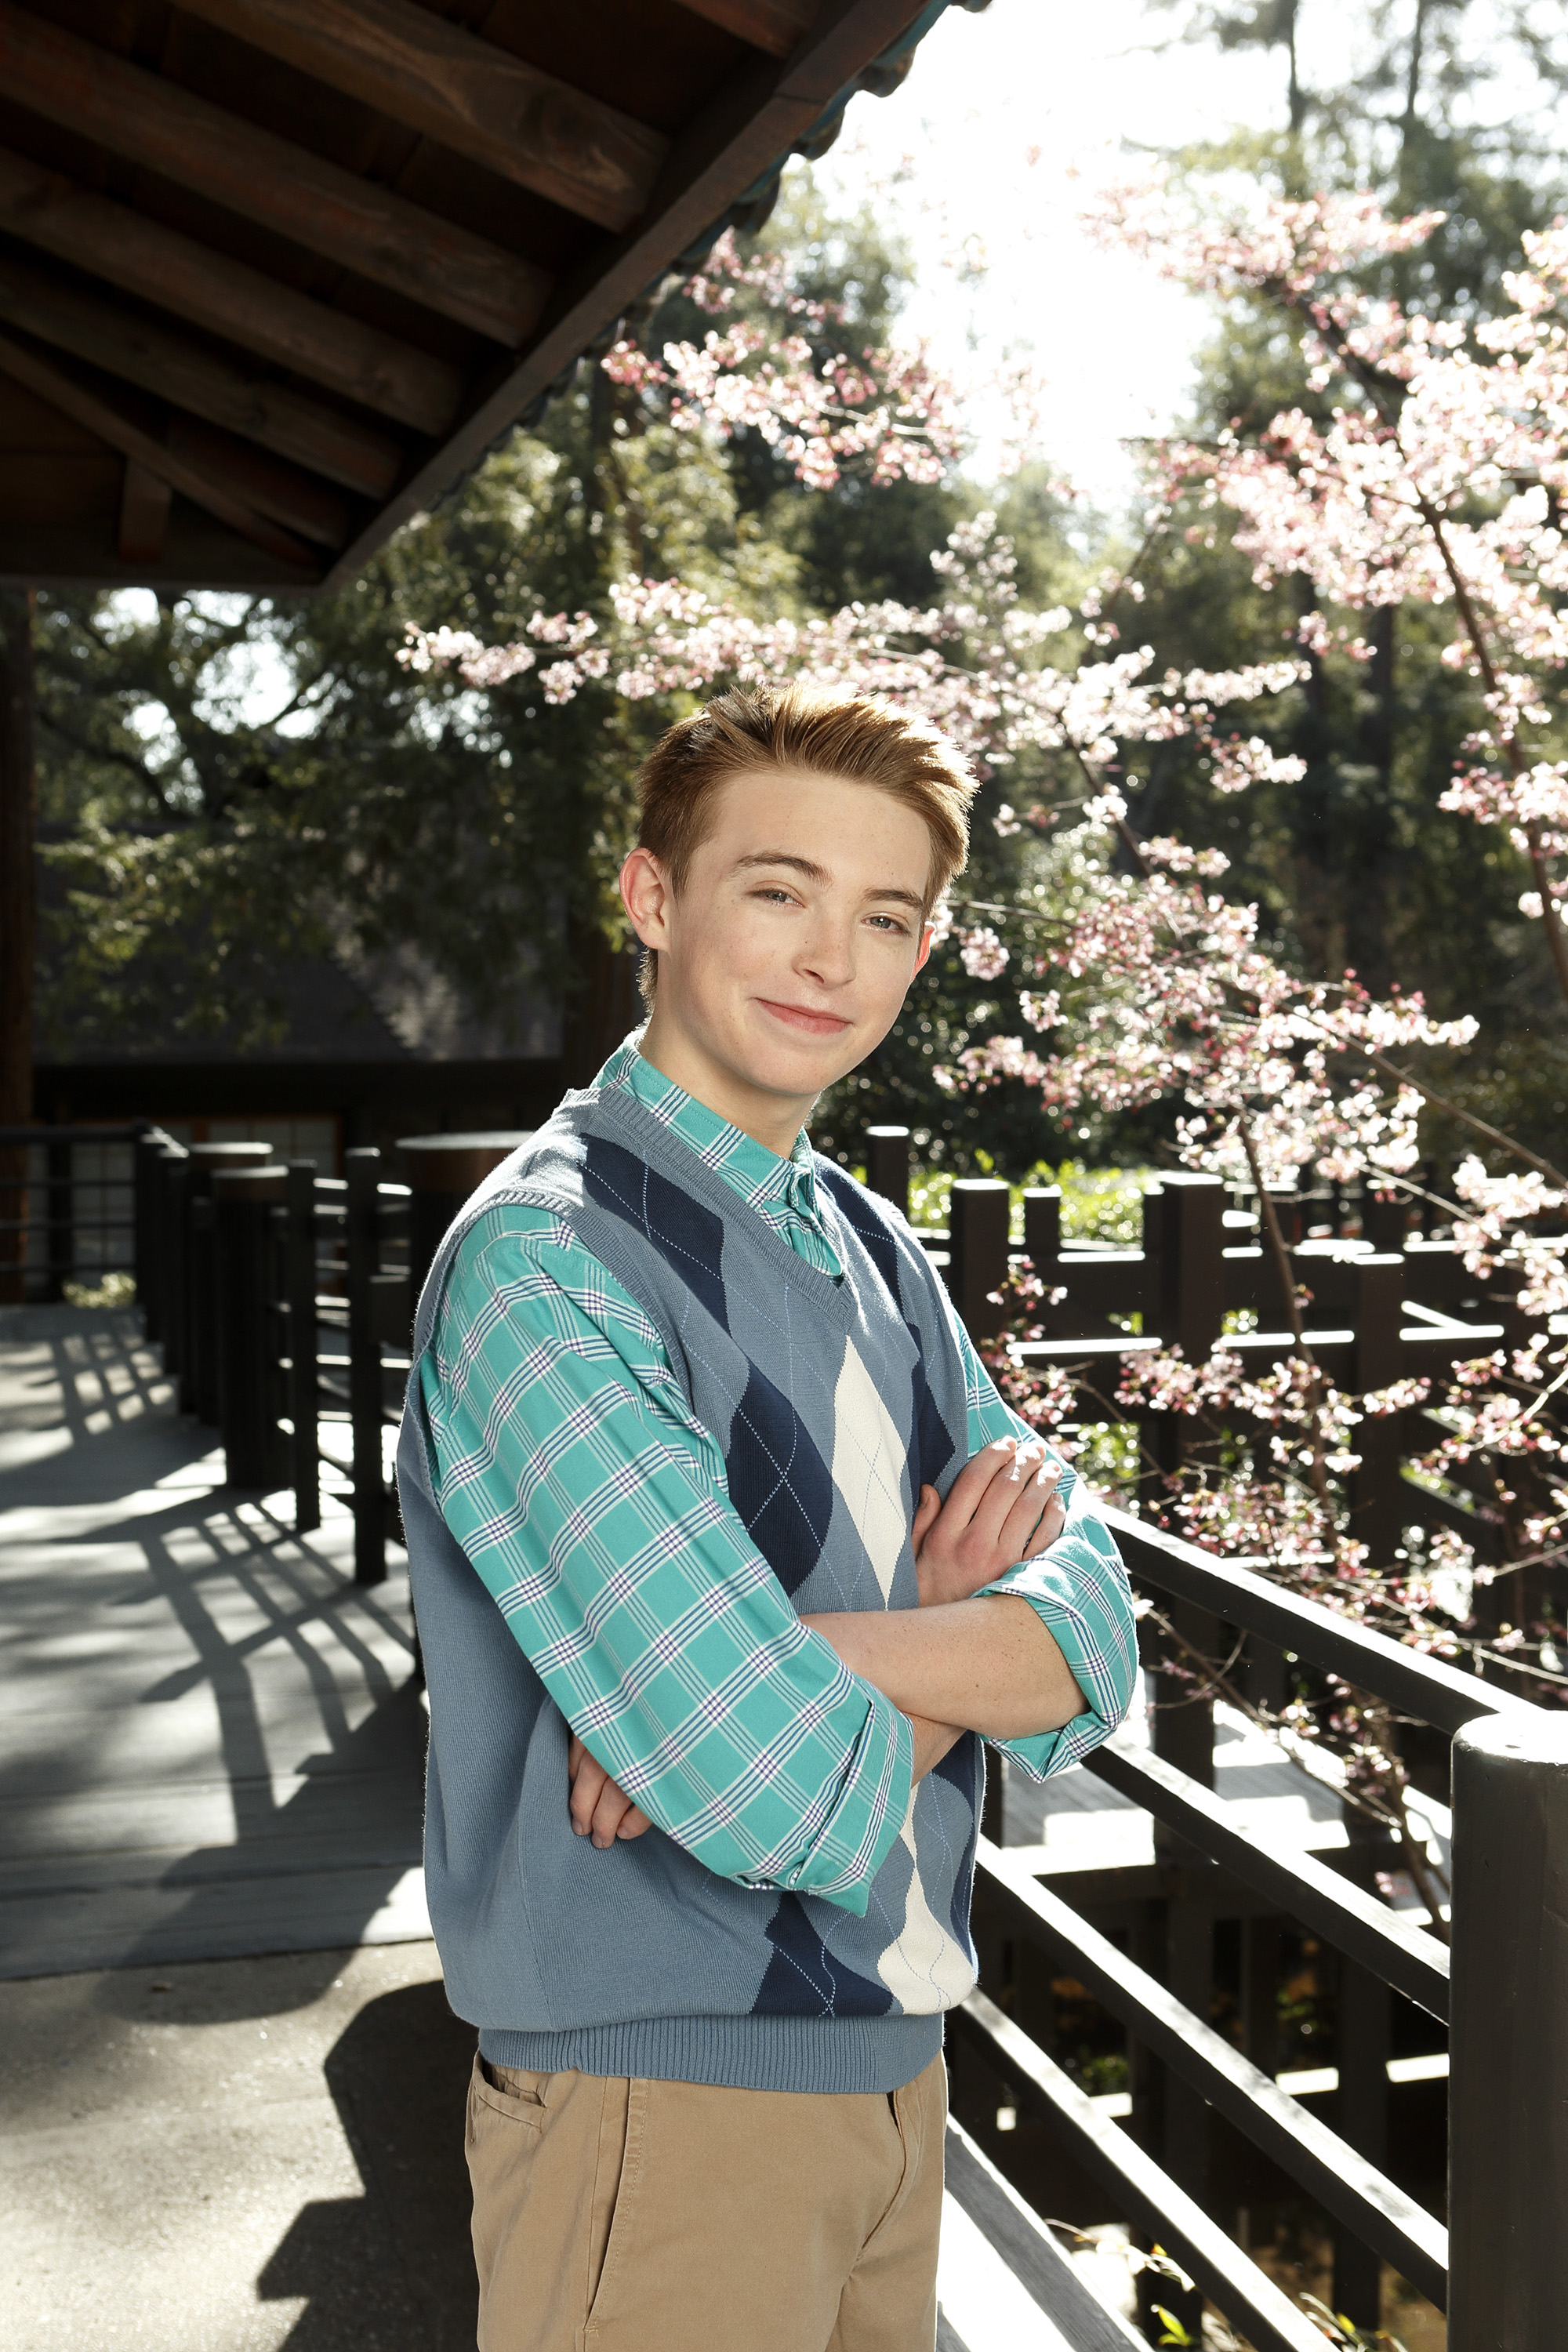 'Kickin' It' Cast What Are Disney XD Stars Up To Now?